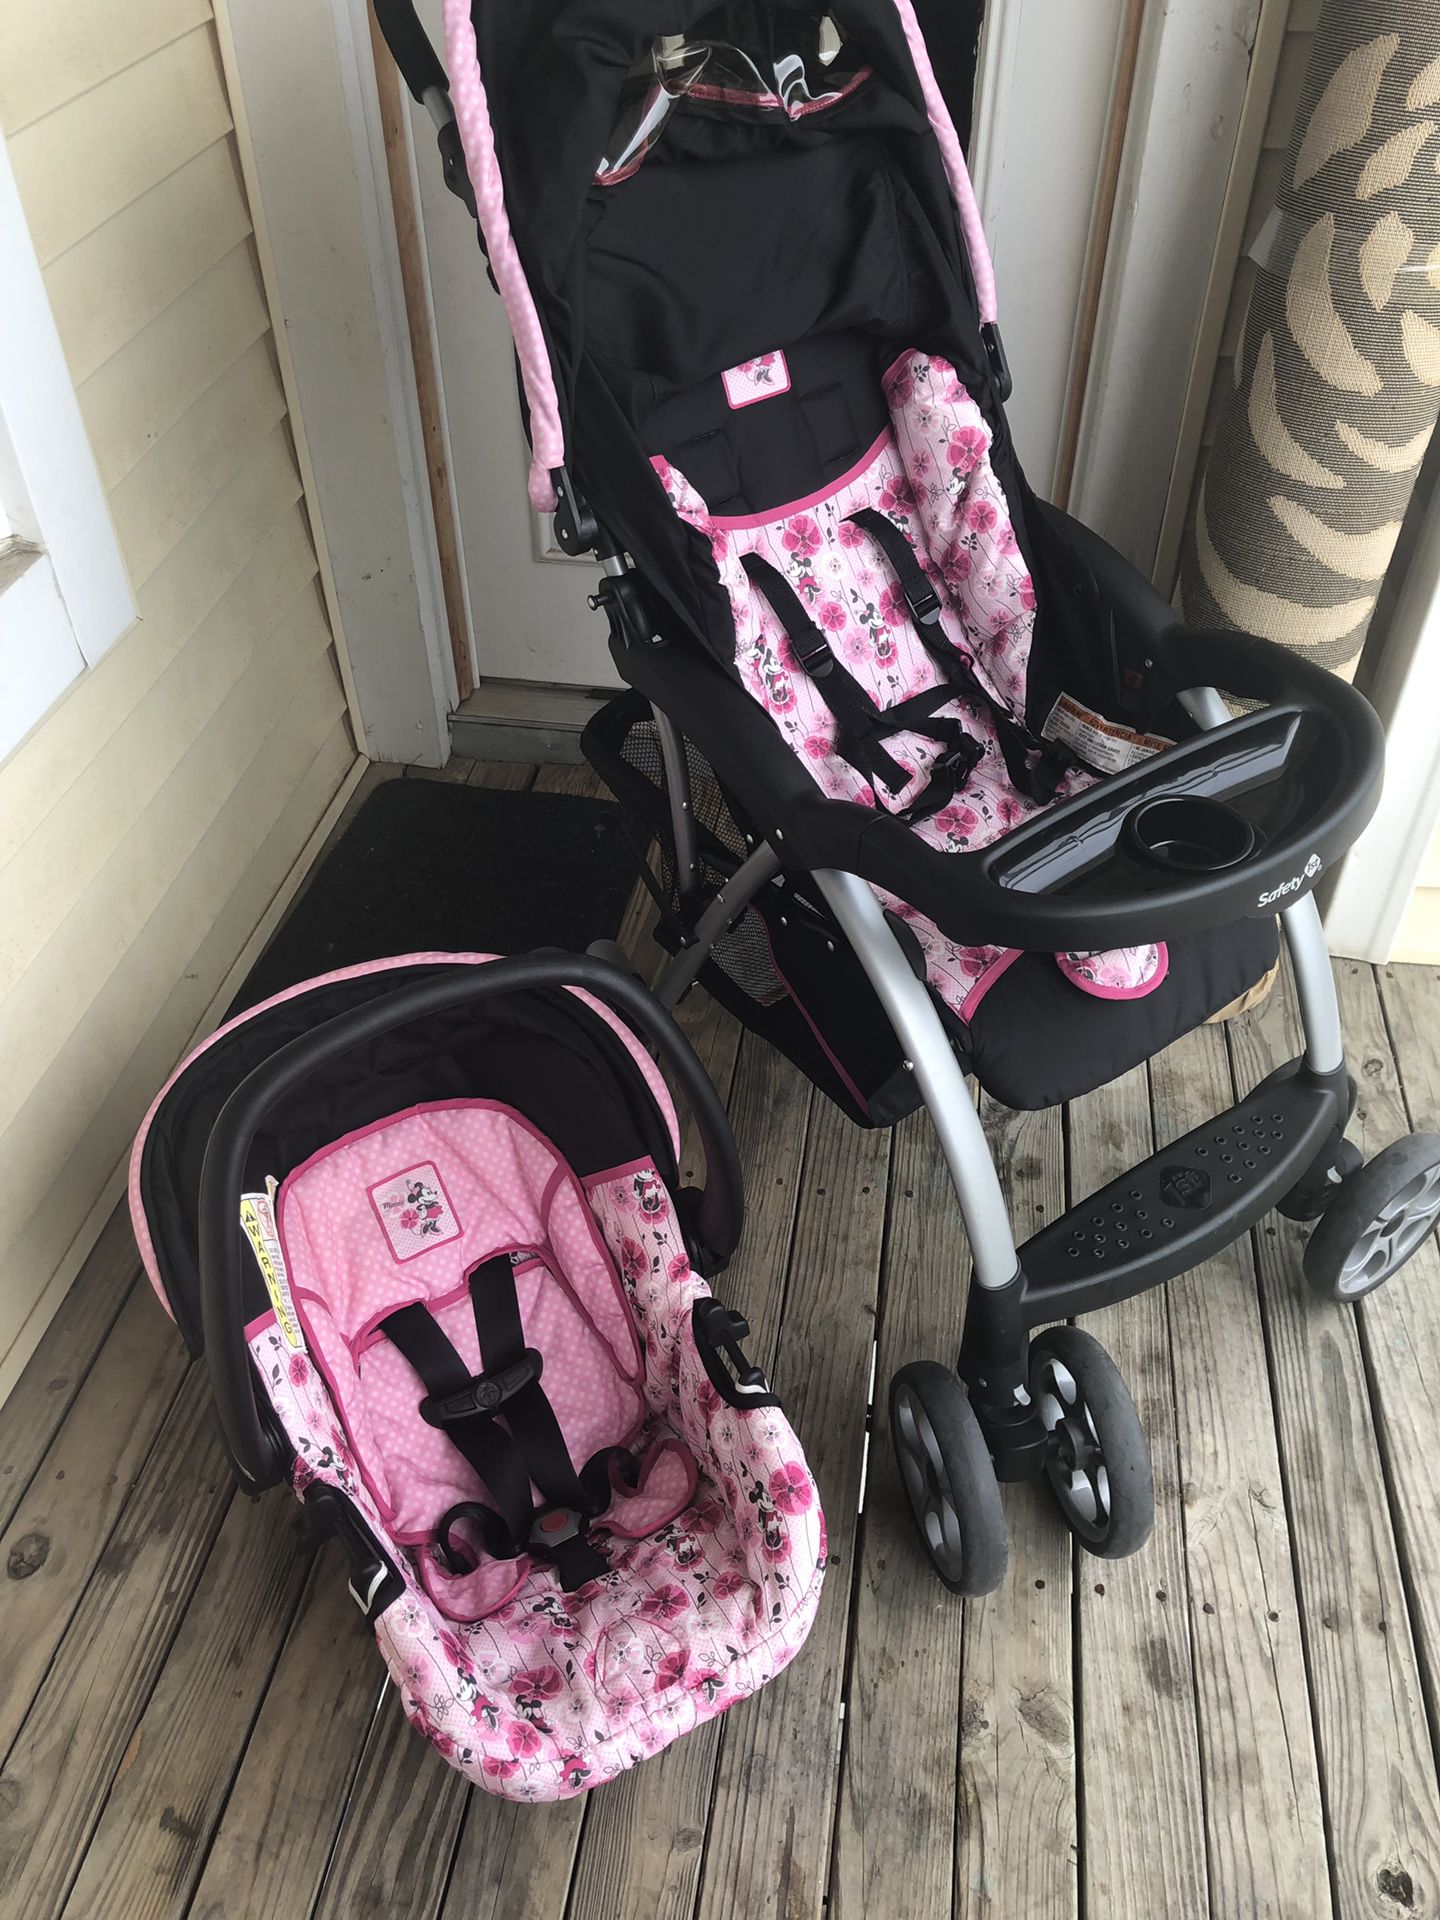 Minnie Mouse stroller travel system